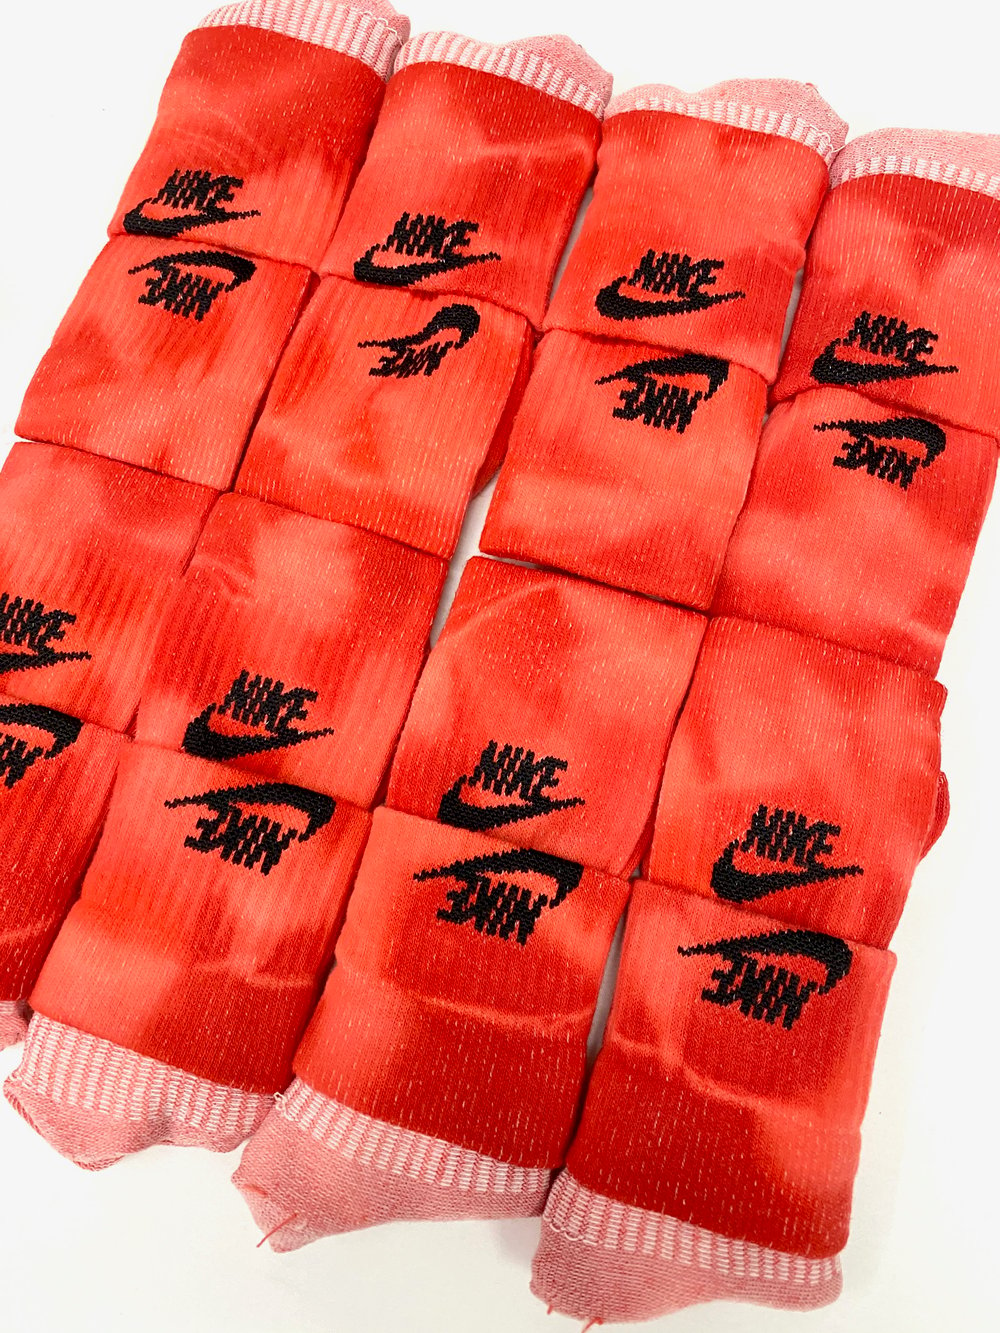 NEW FIRE SOCKS  BY MAISON MERE